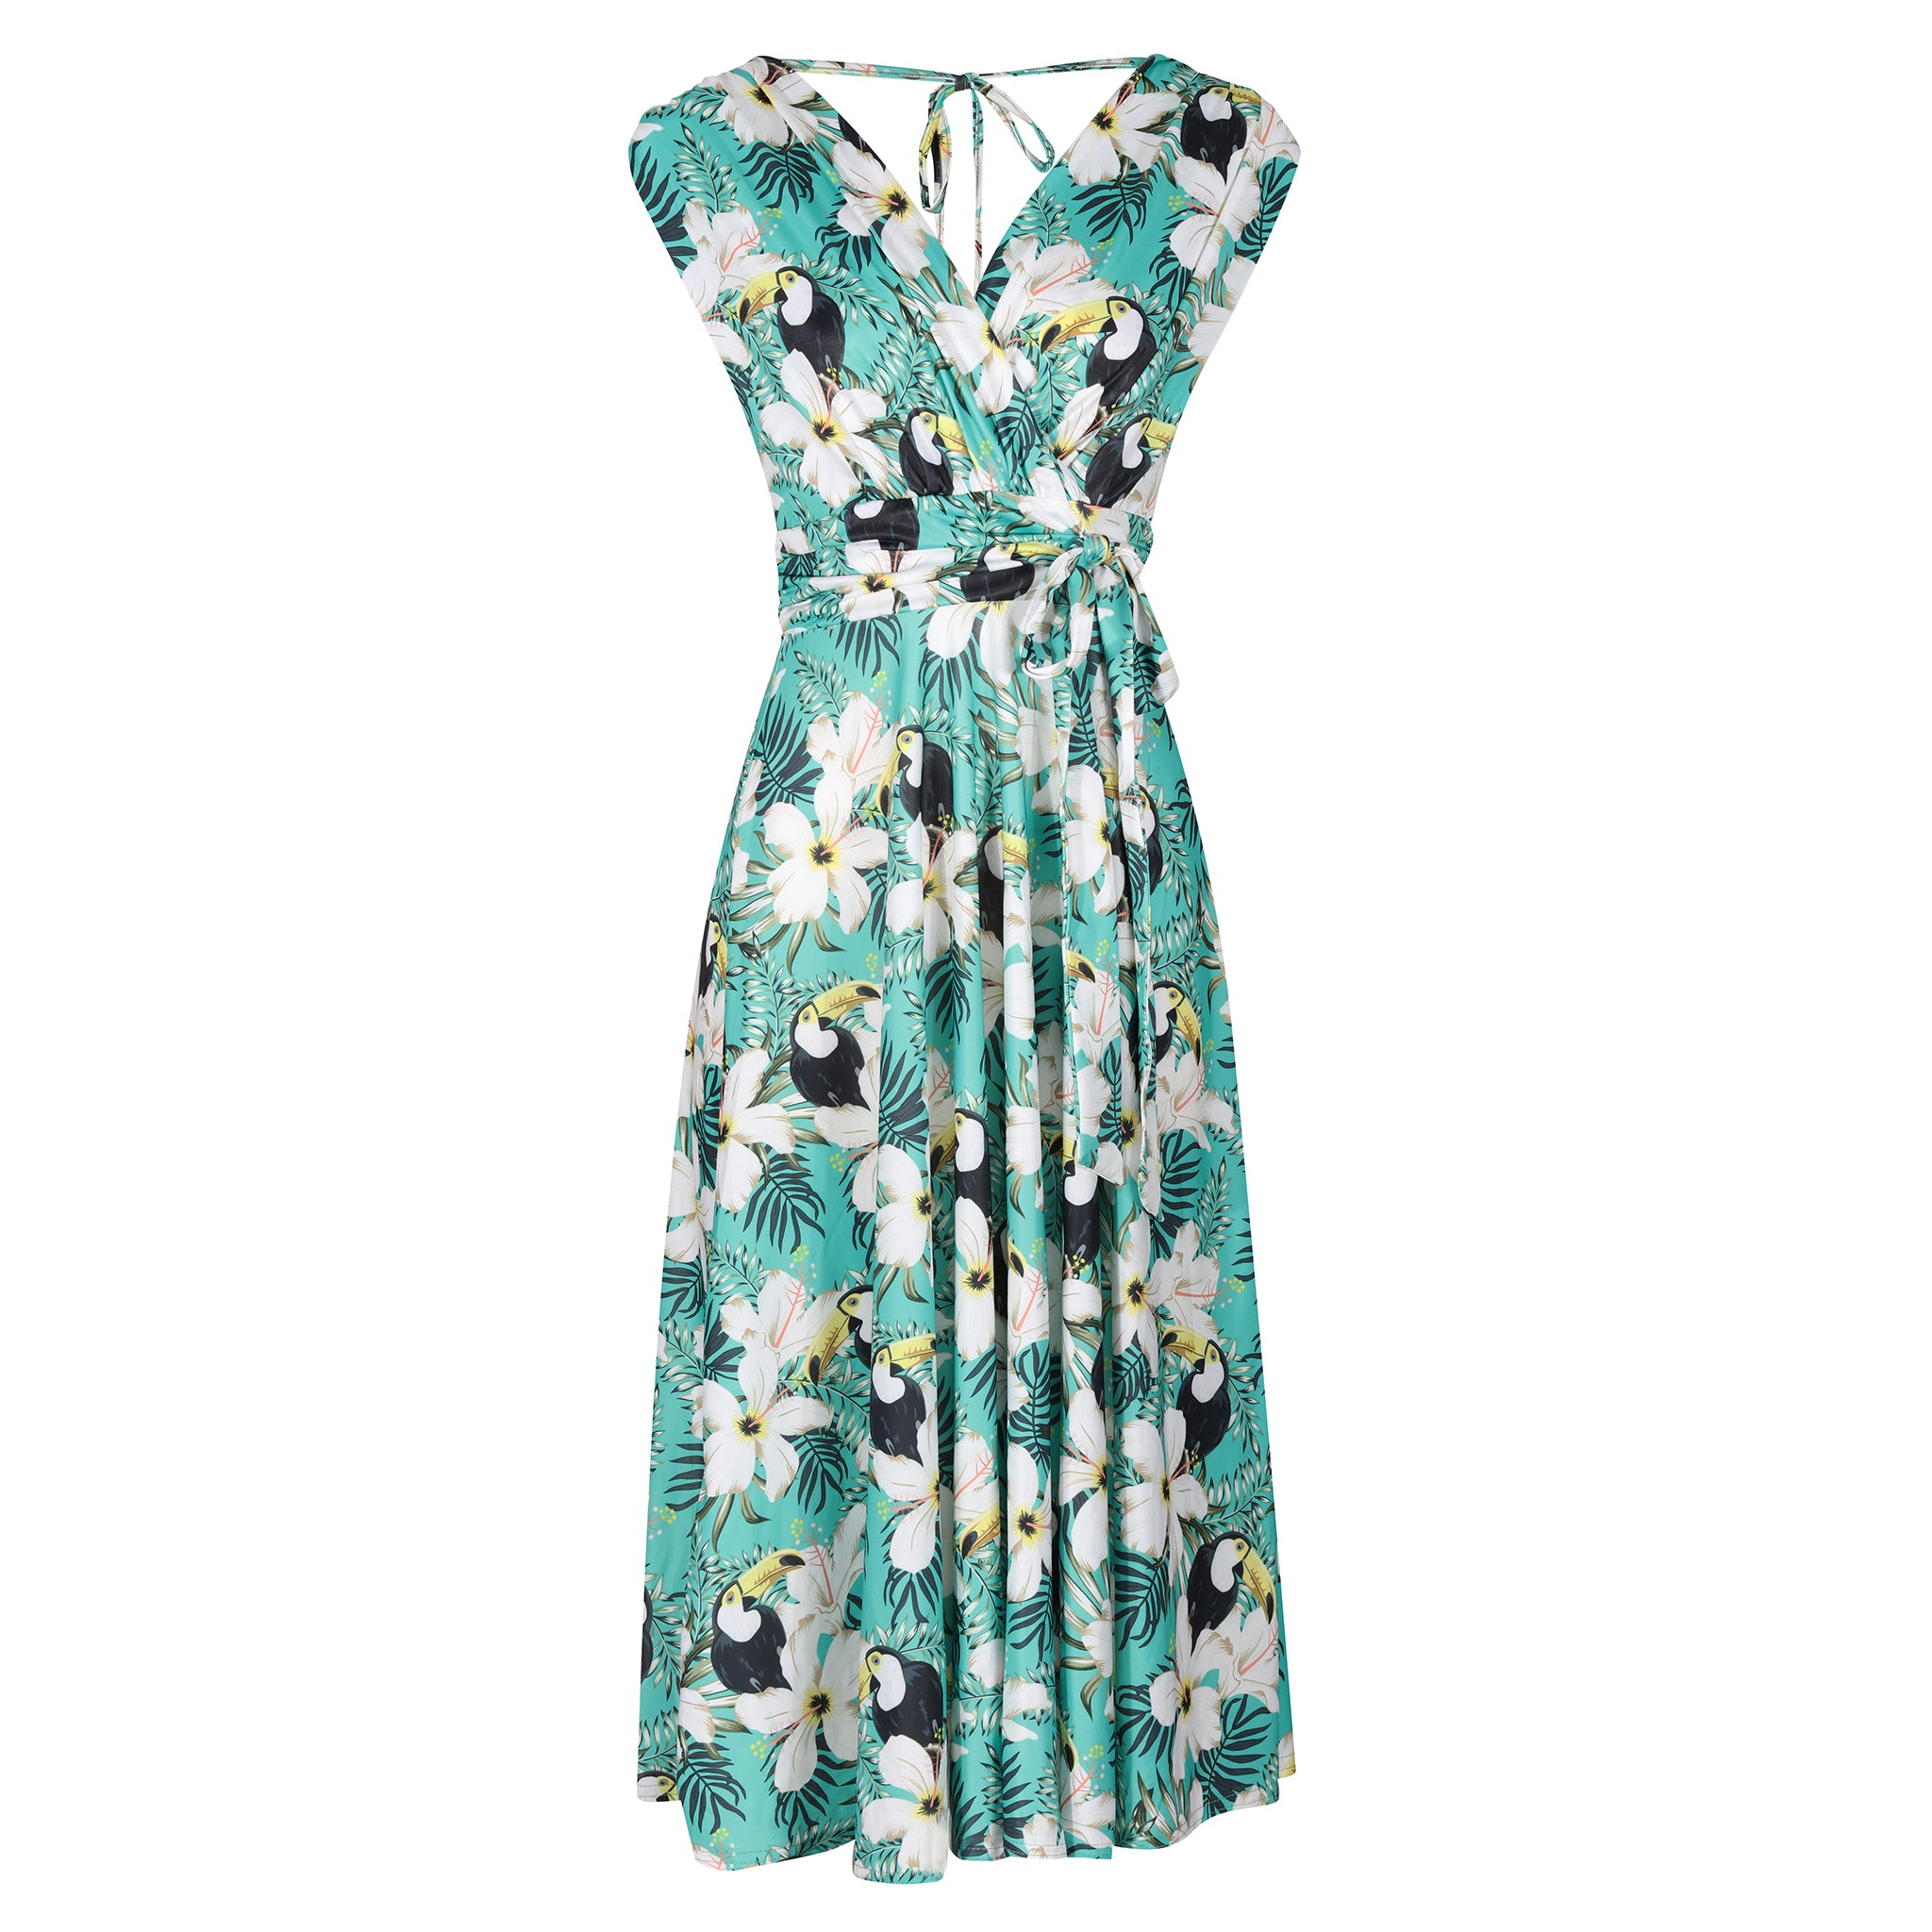 Green Floral & Toucan Print V Neck Crossover Top Empire Waist Swing Dress